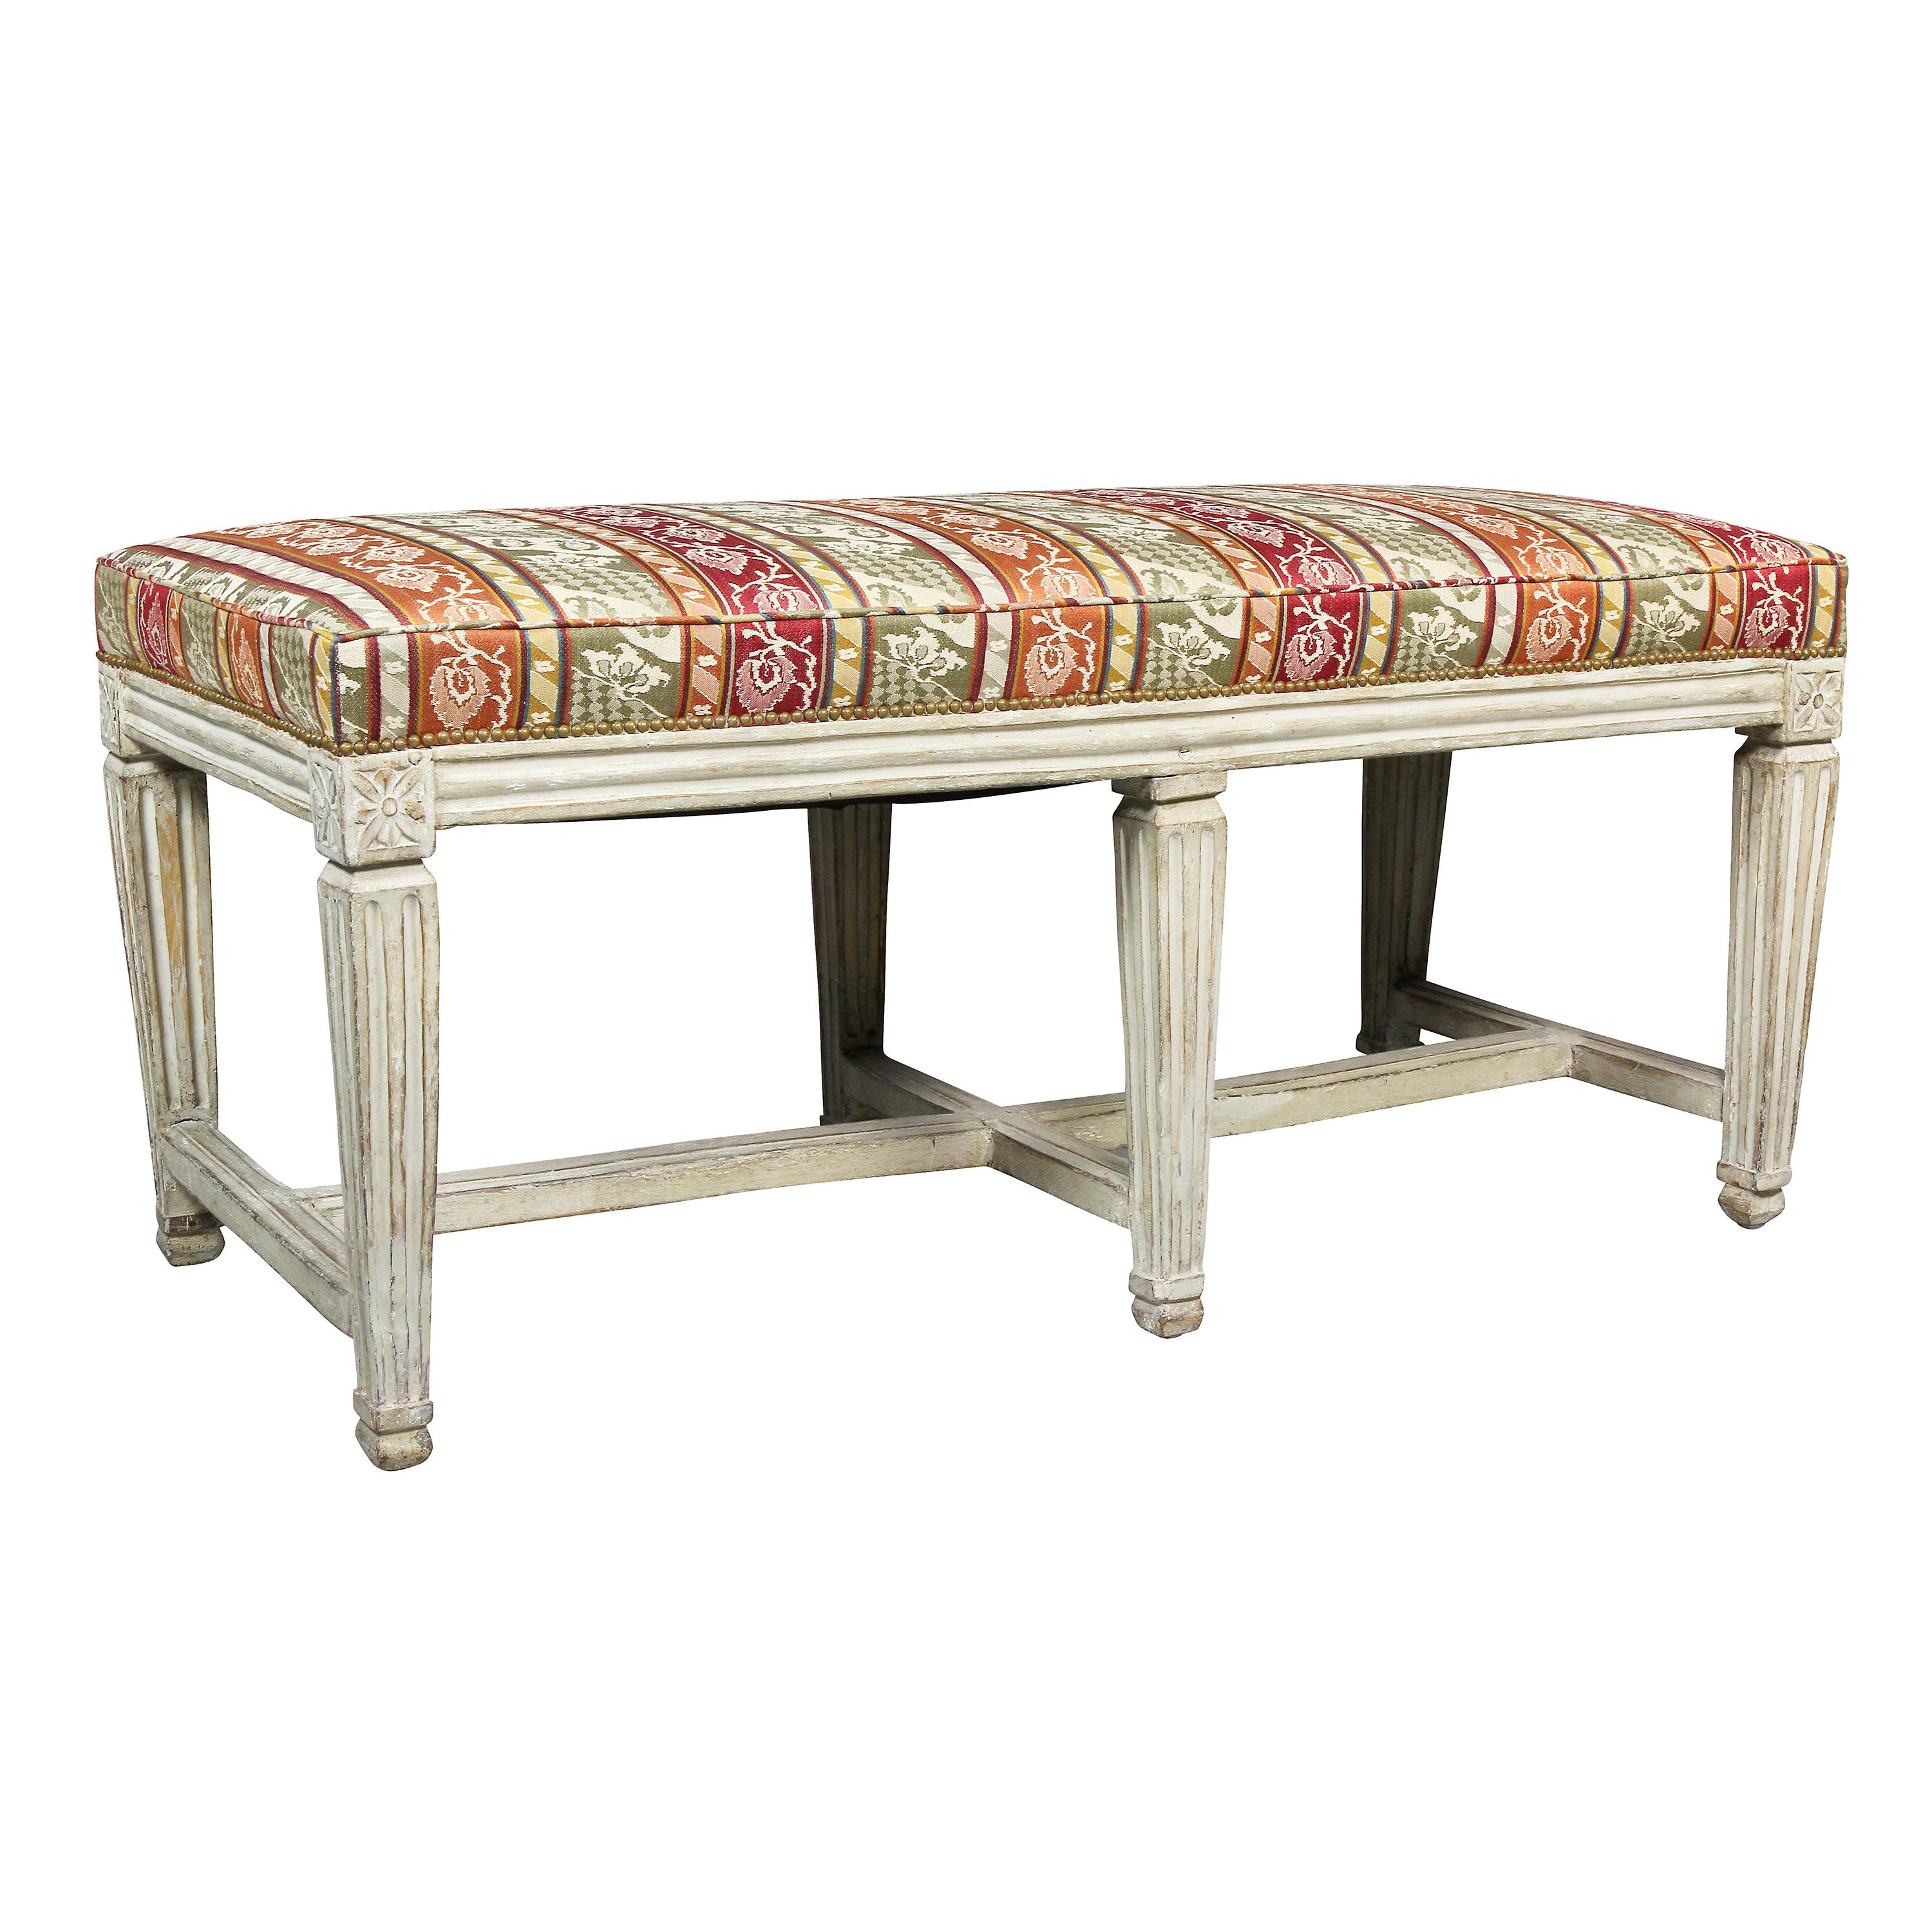 Swedish Neoclassical White Painted Bench